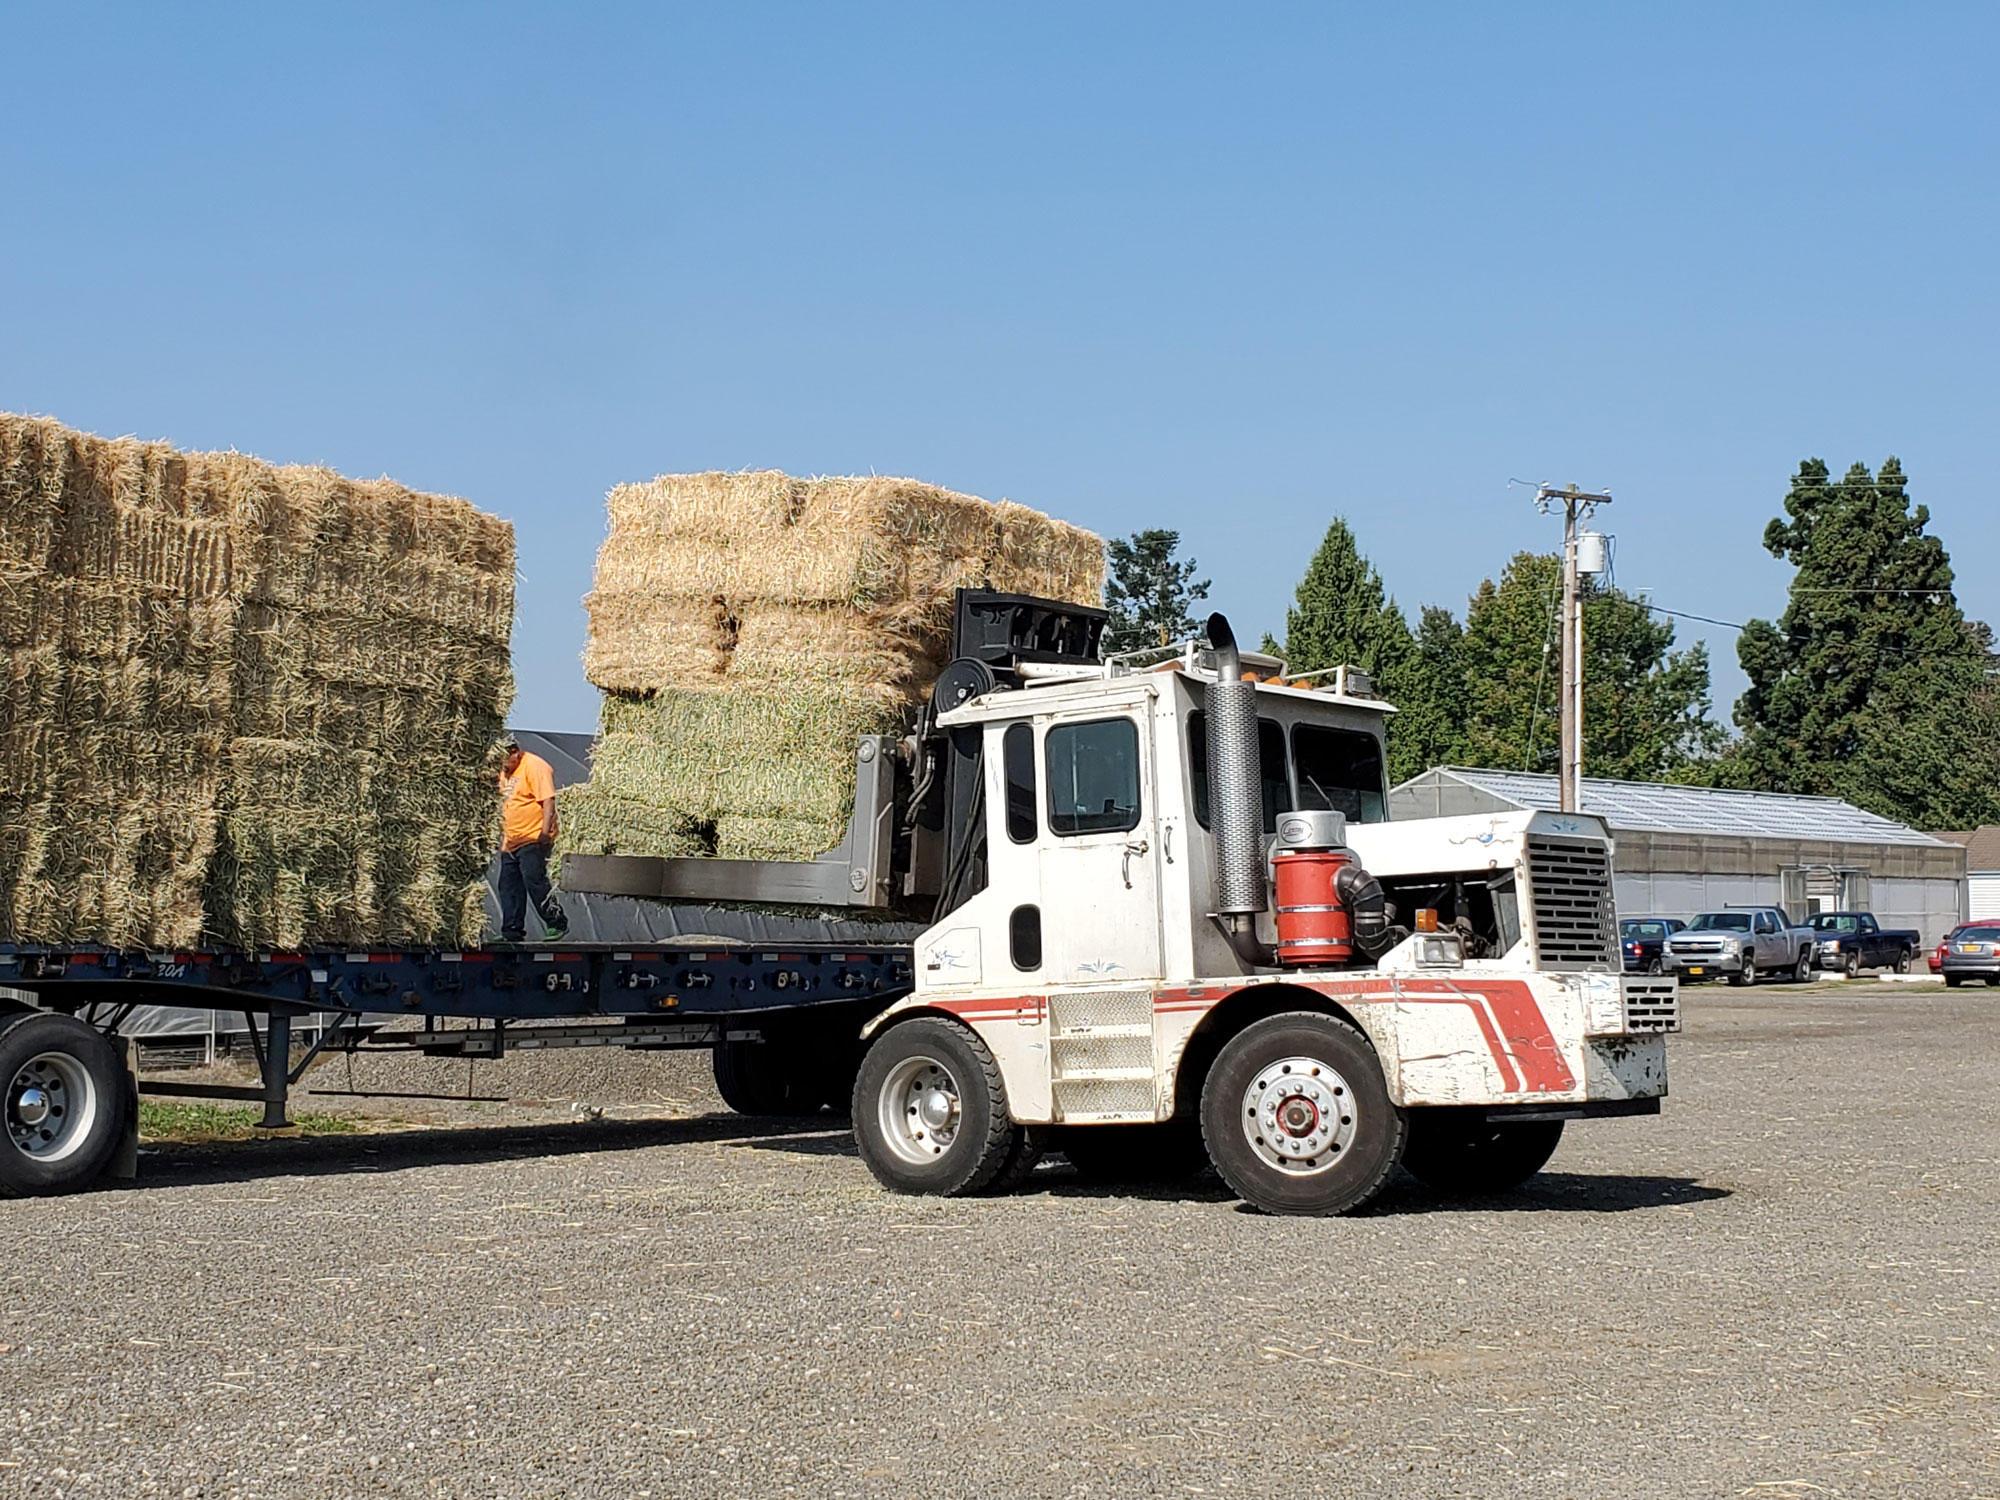 A semi truck carrying donated hay arrives at the North Willamette Research and Extension Center in Aurora.